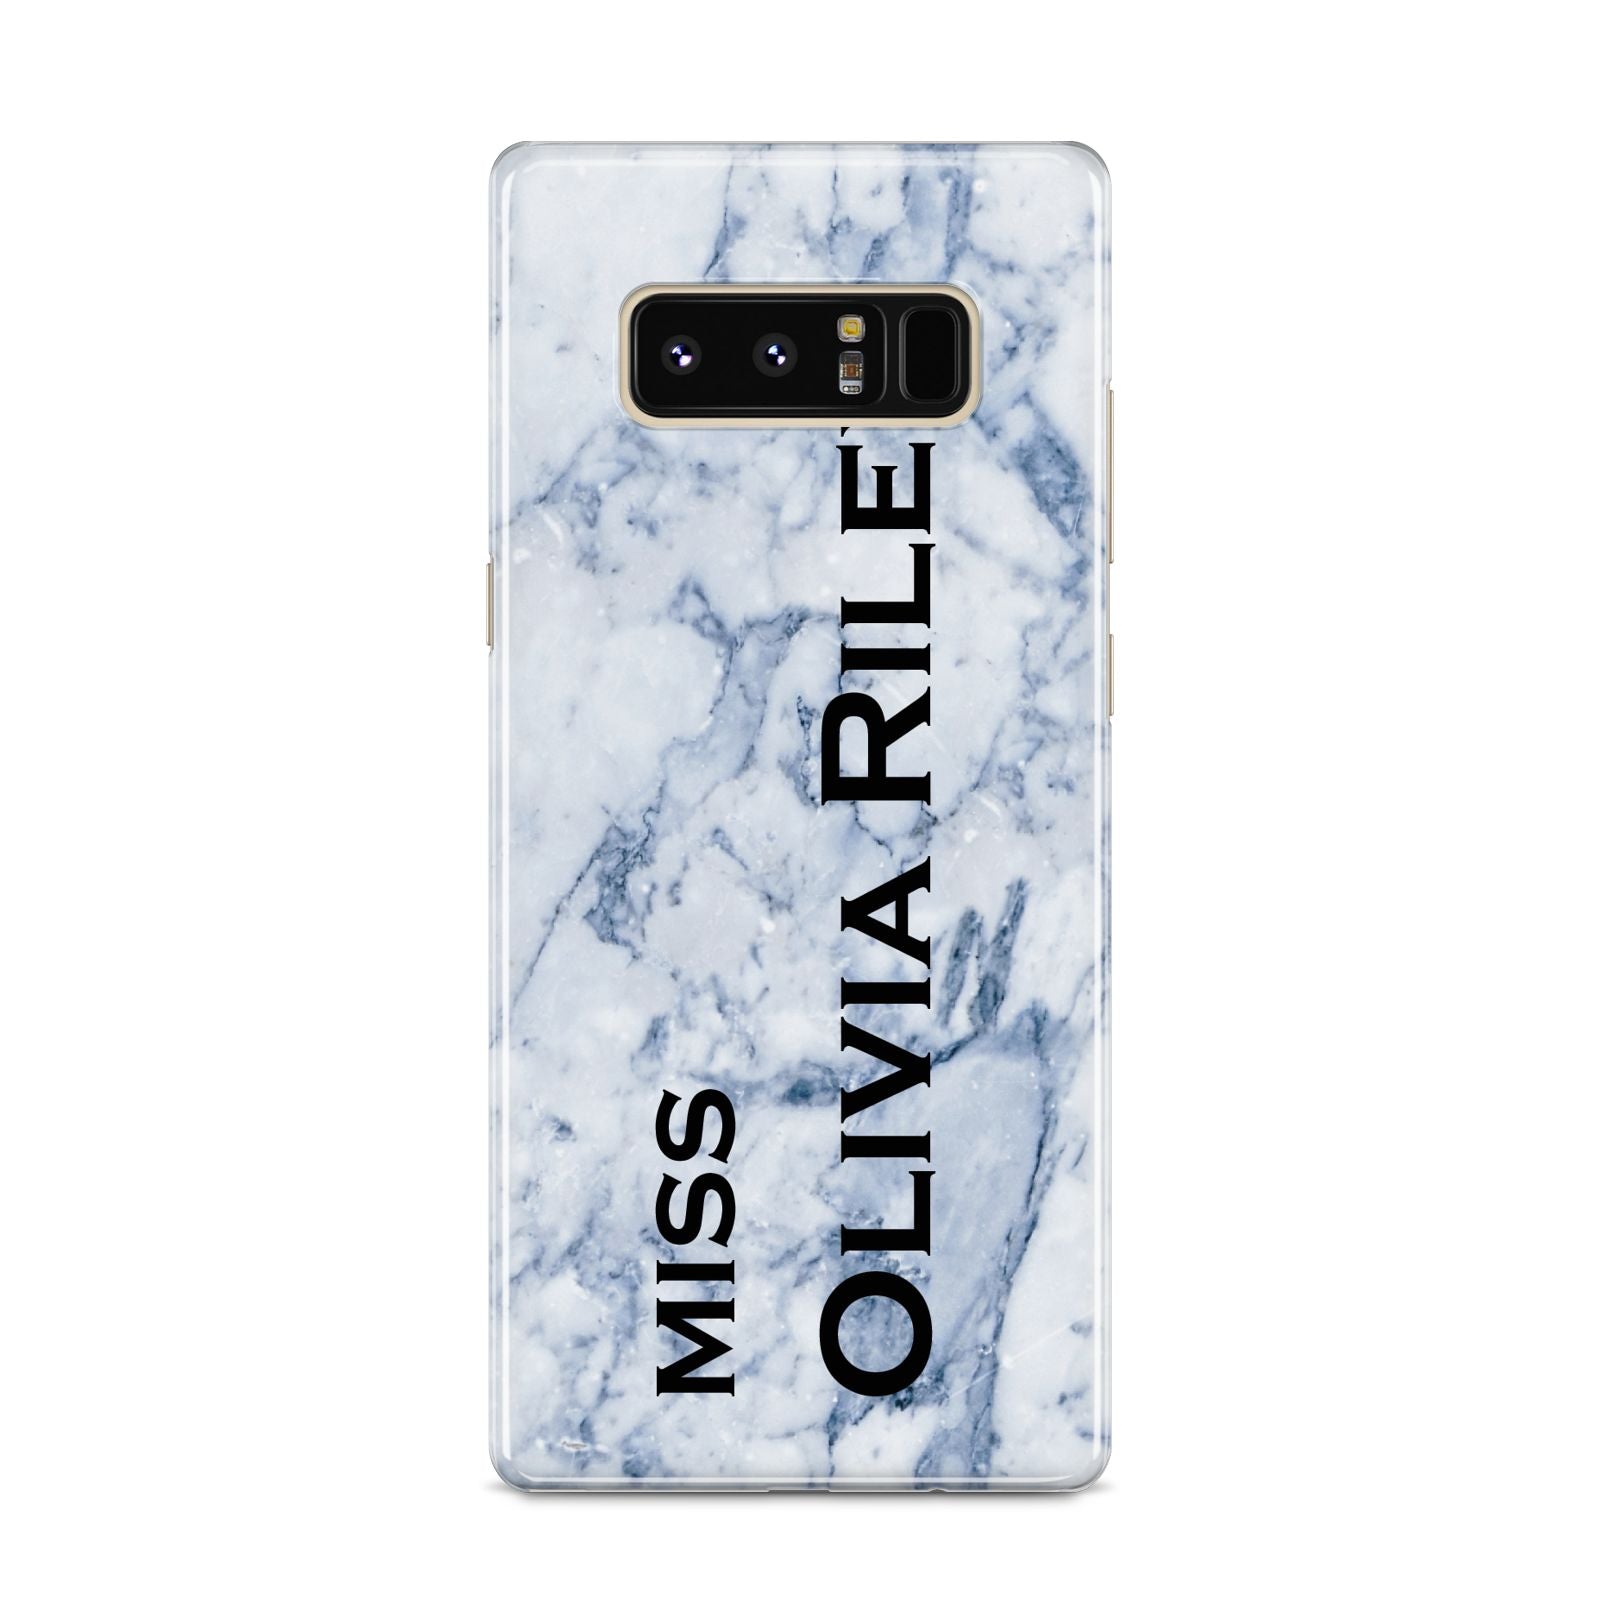 Full Name Grey Marble Samsung Galaxy S8 Case